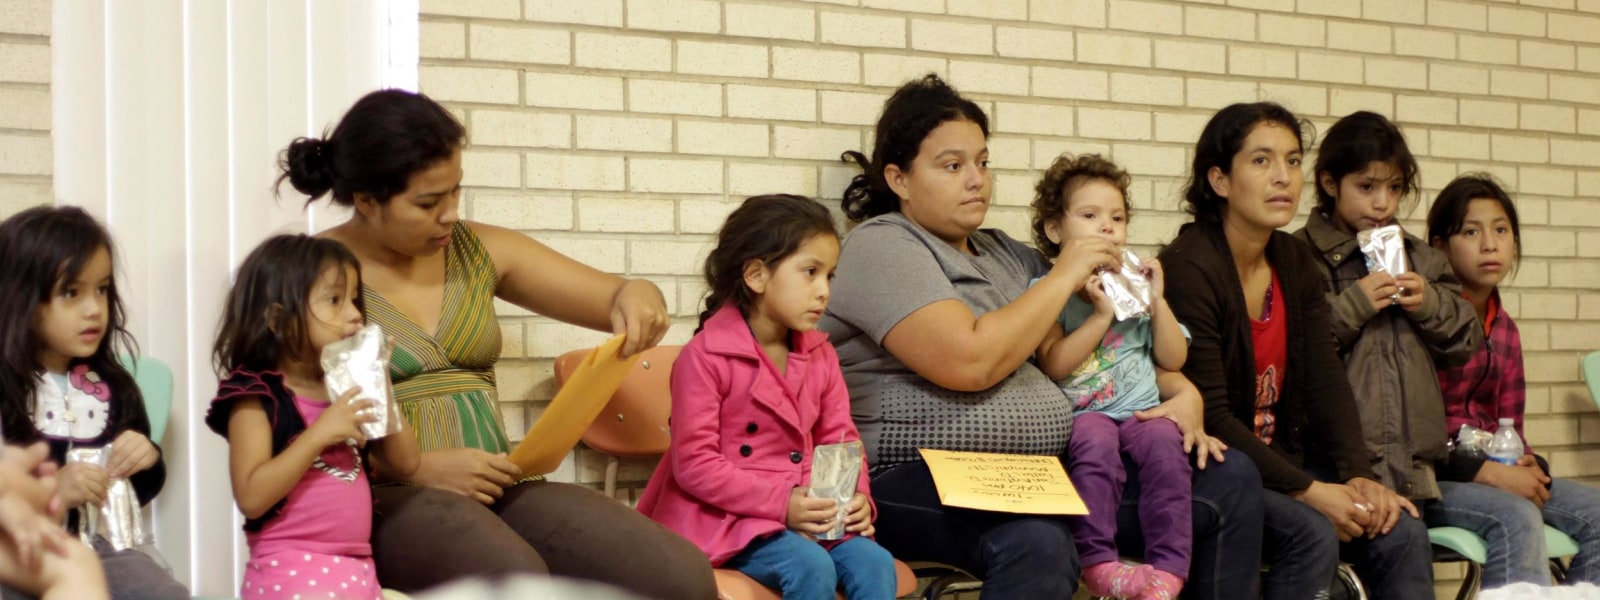 Image: Migrants sit at the Sacred Heart Catholic Church temporary migrant shelter in McAllen, Texas